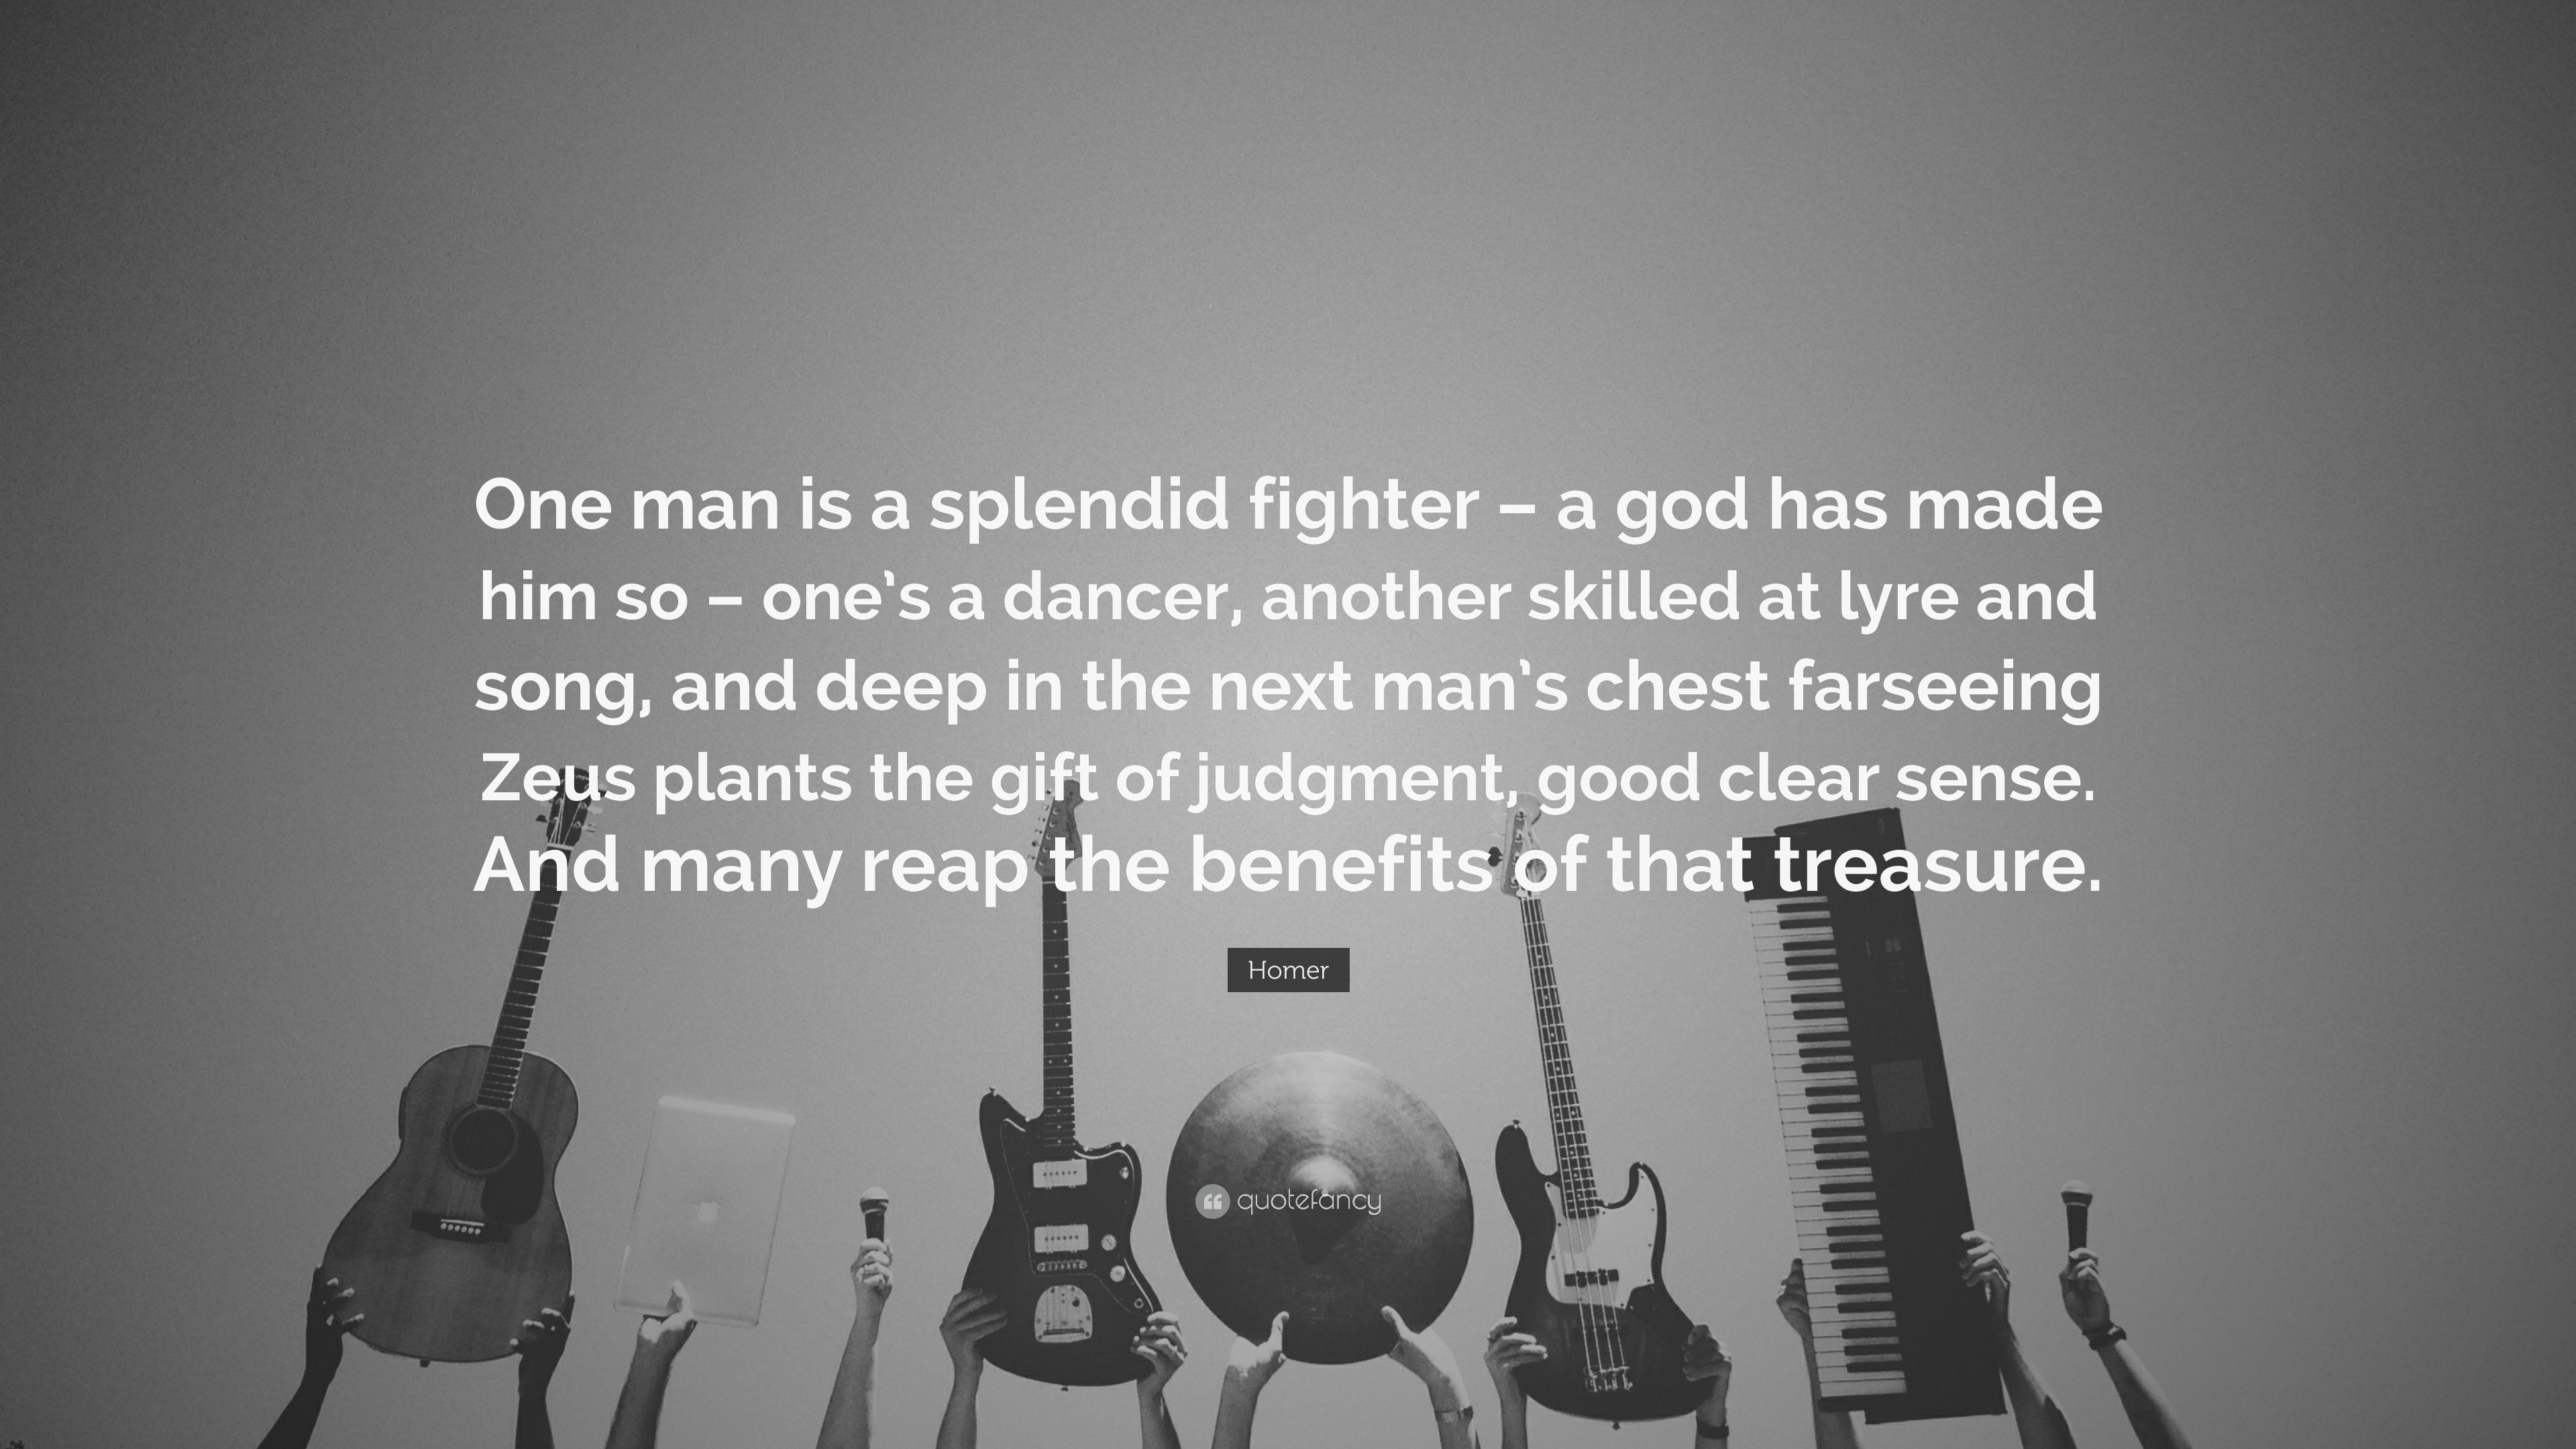 Homer Quote: “One man is a splendid fighter